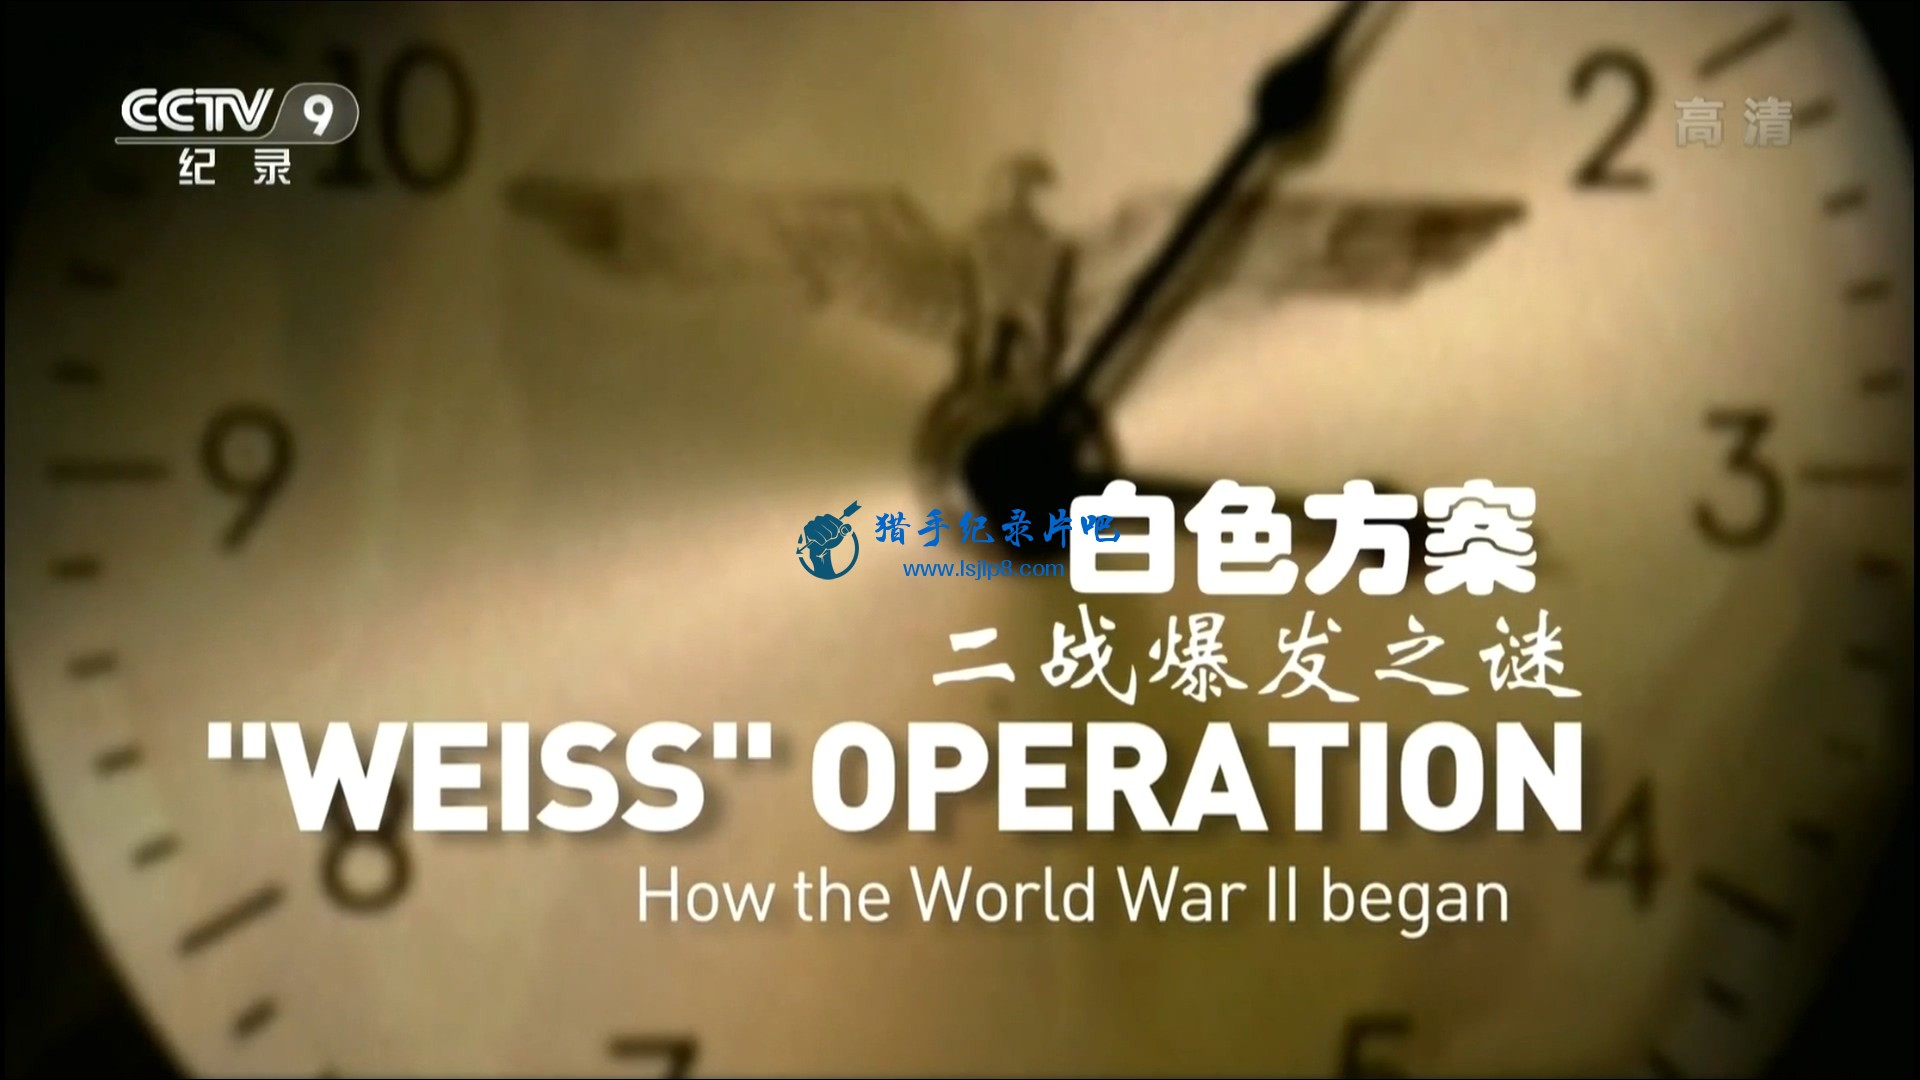 20151213_CCTV-9_Universal.Vision-Weiss.Operation-How.the.WWII.began.ts_20191012_.jpg